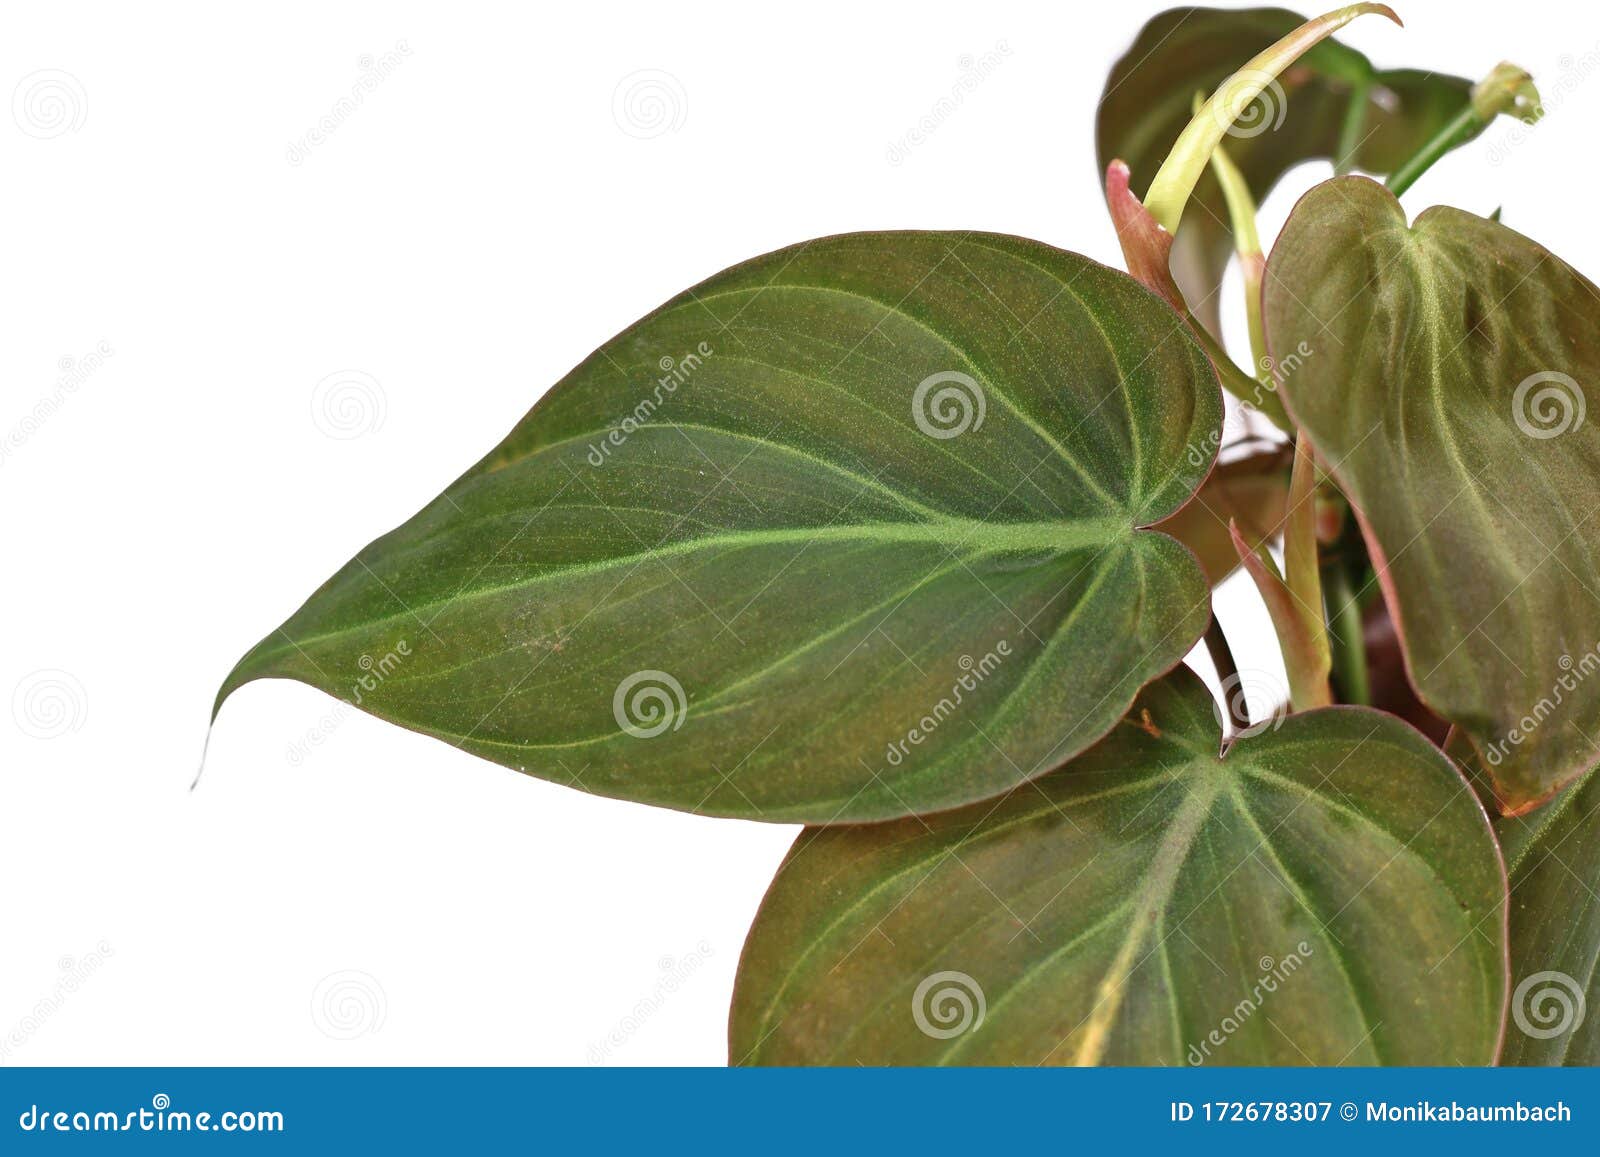 tropical `philodendron hederaceum micans` house plant with close up of heart d leaf on white background